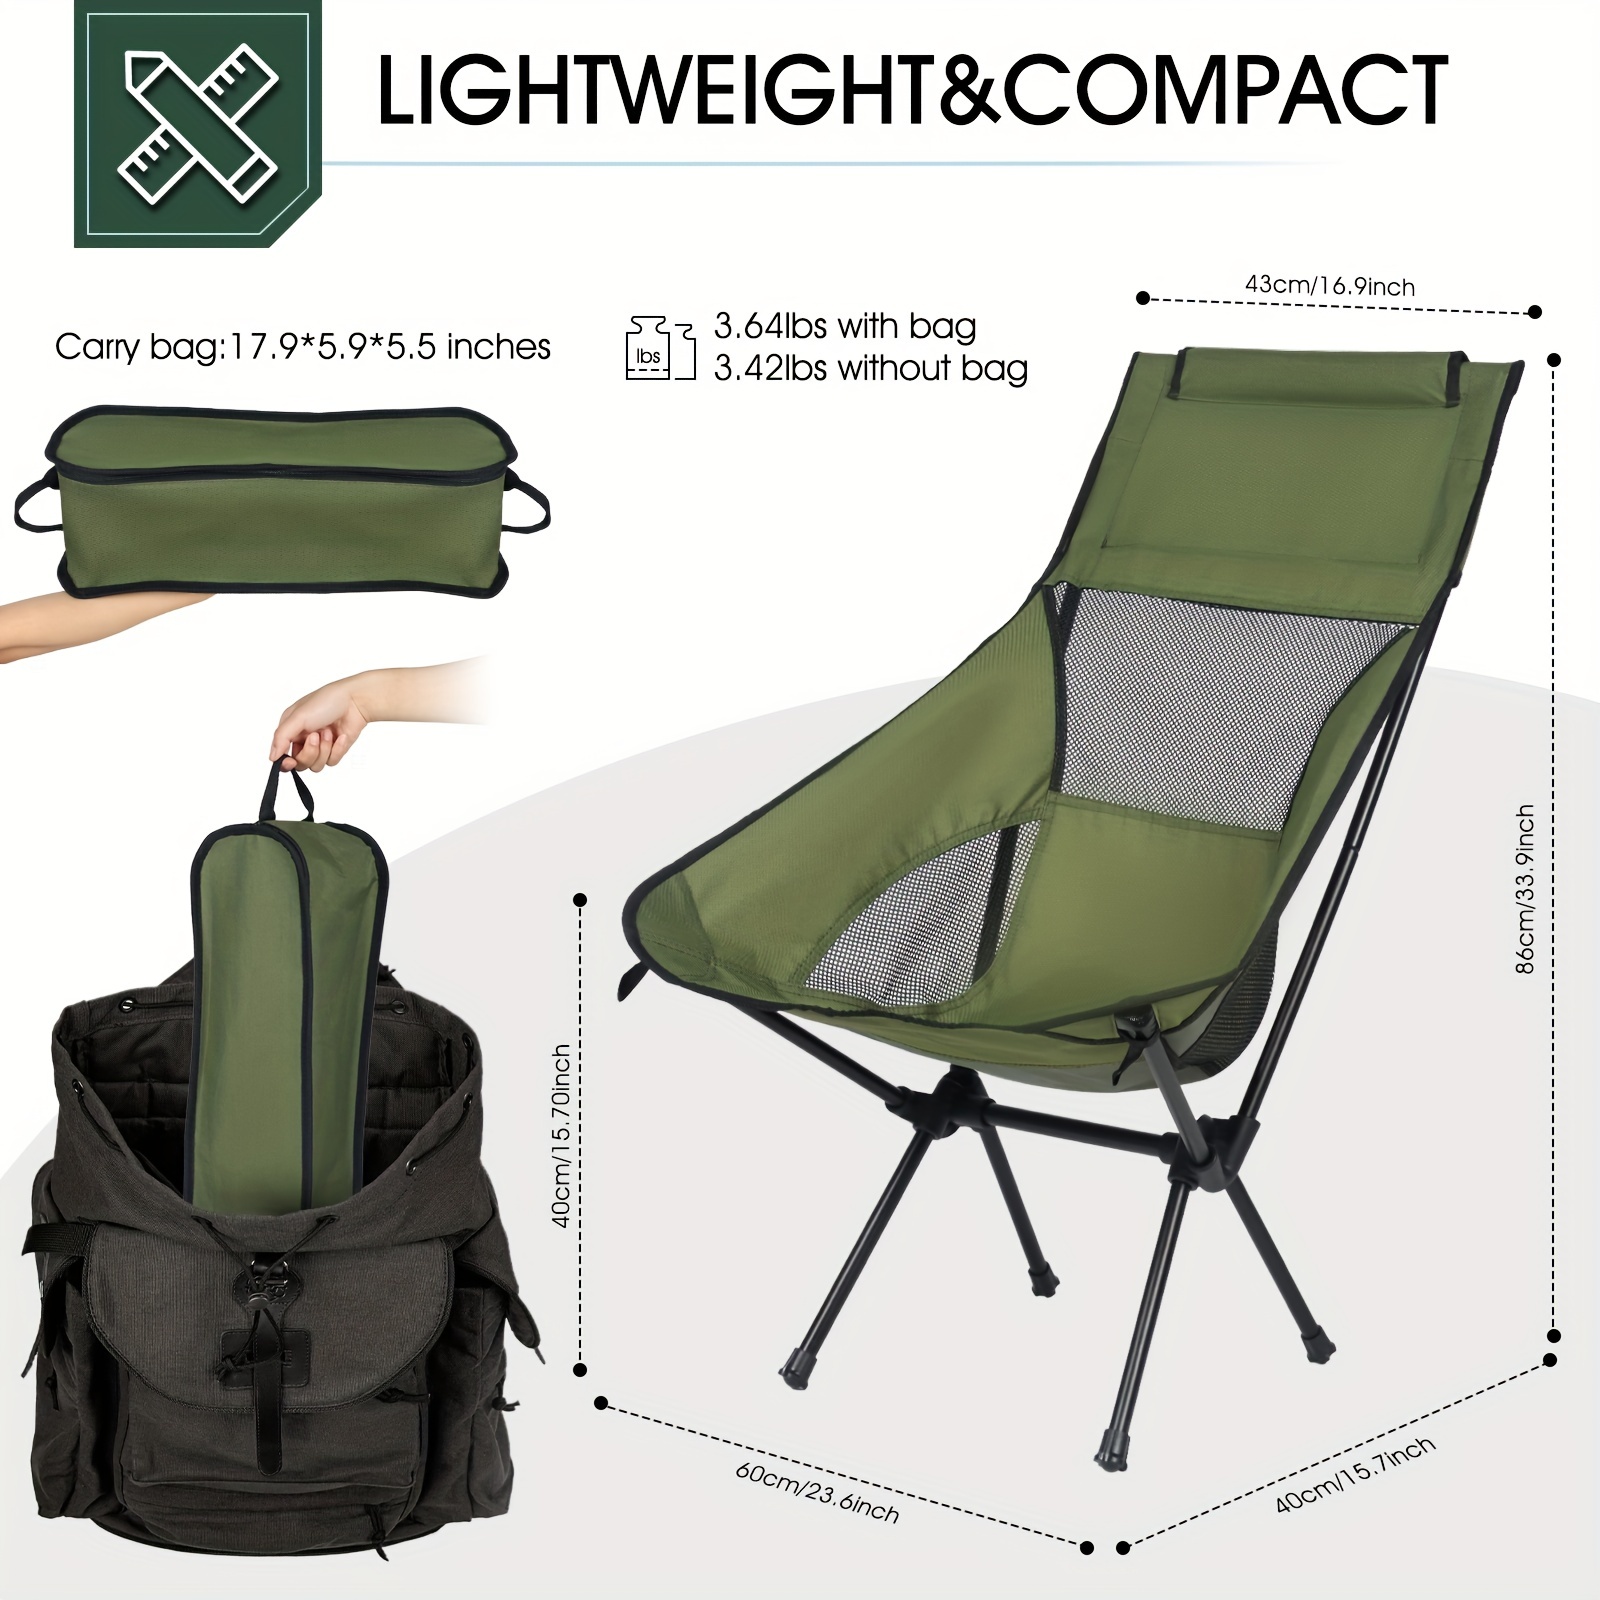 Folding Portable Camping Chair Adults Kids, Lightweight Camping Chair with  Cup Holder for Outdoor Caravanning, Picnic, BBQs, Hunting, Beach Chair,  Fold Up Garden Chairs, Fishing Chairs Folding 